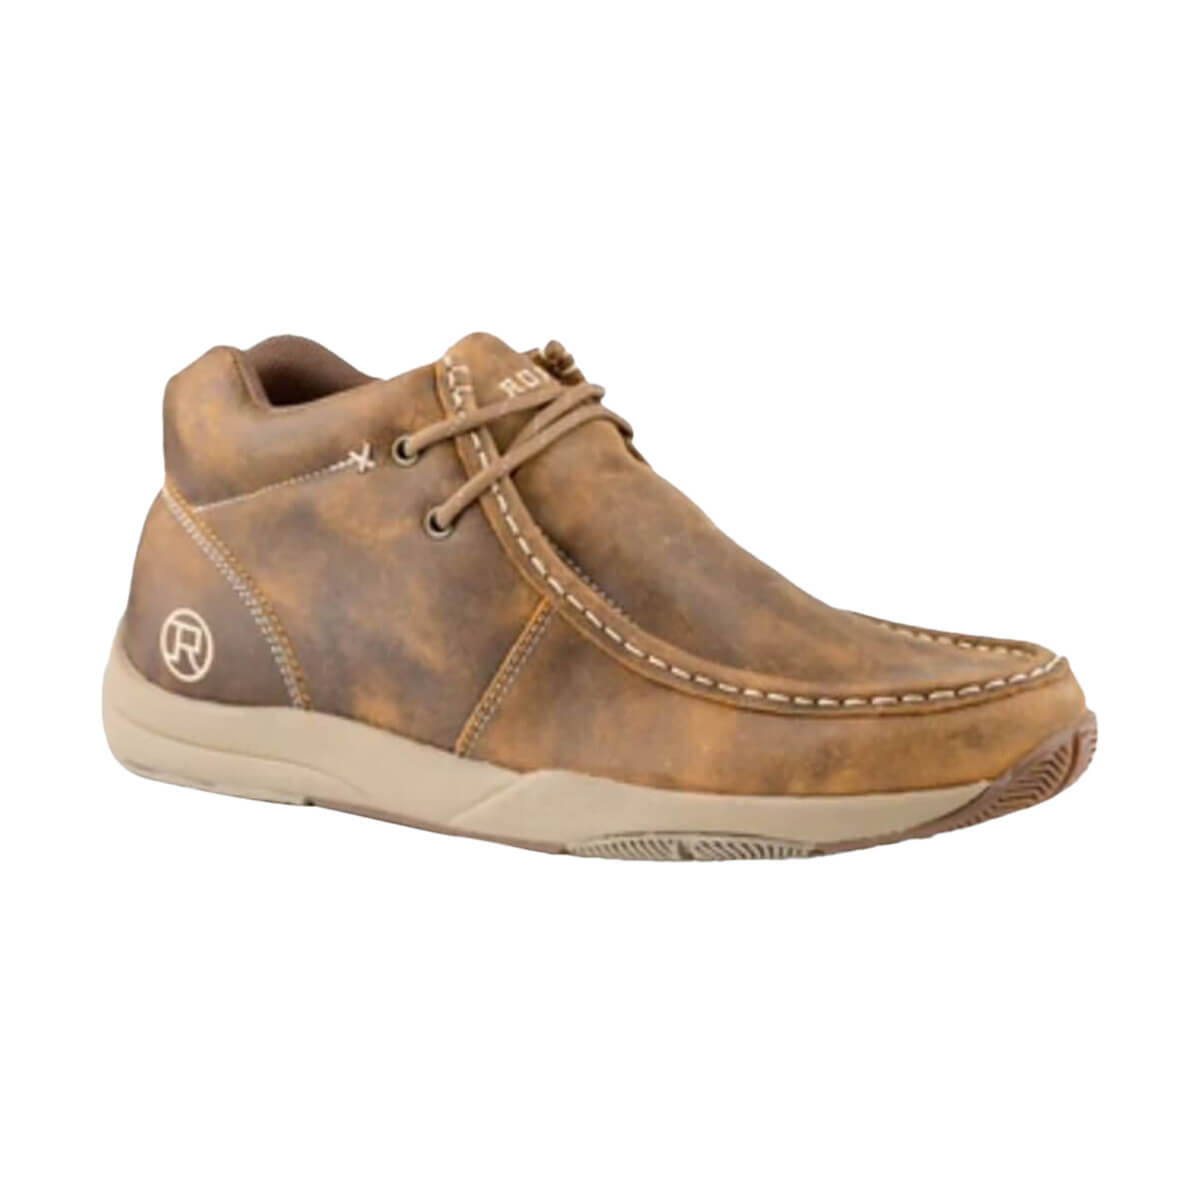 Men's Swifter Sole Chukka Tan Distressed Leather - Brown